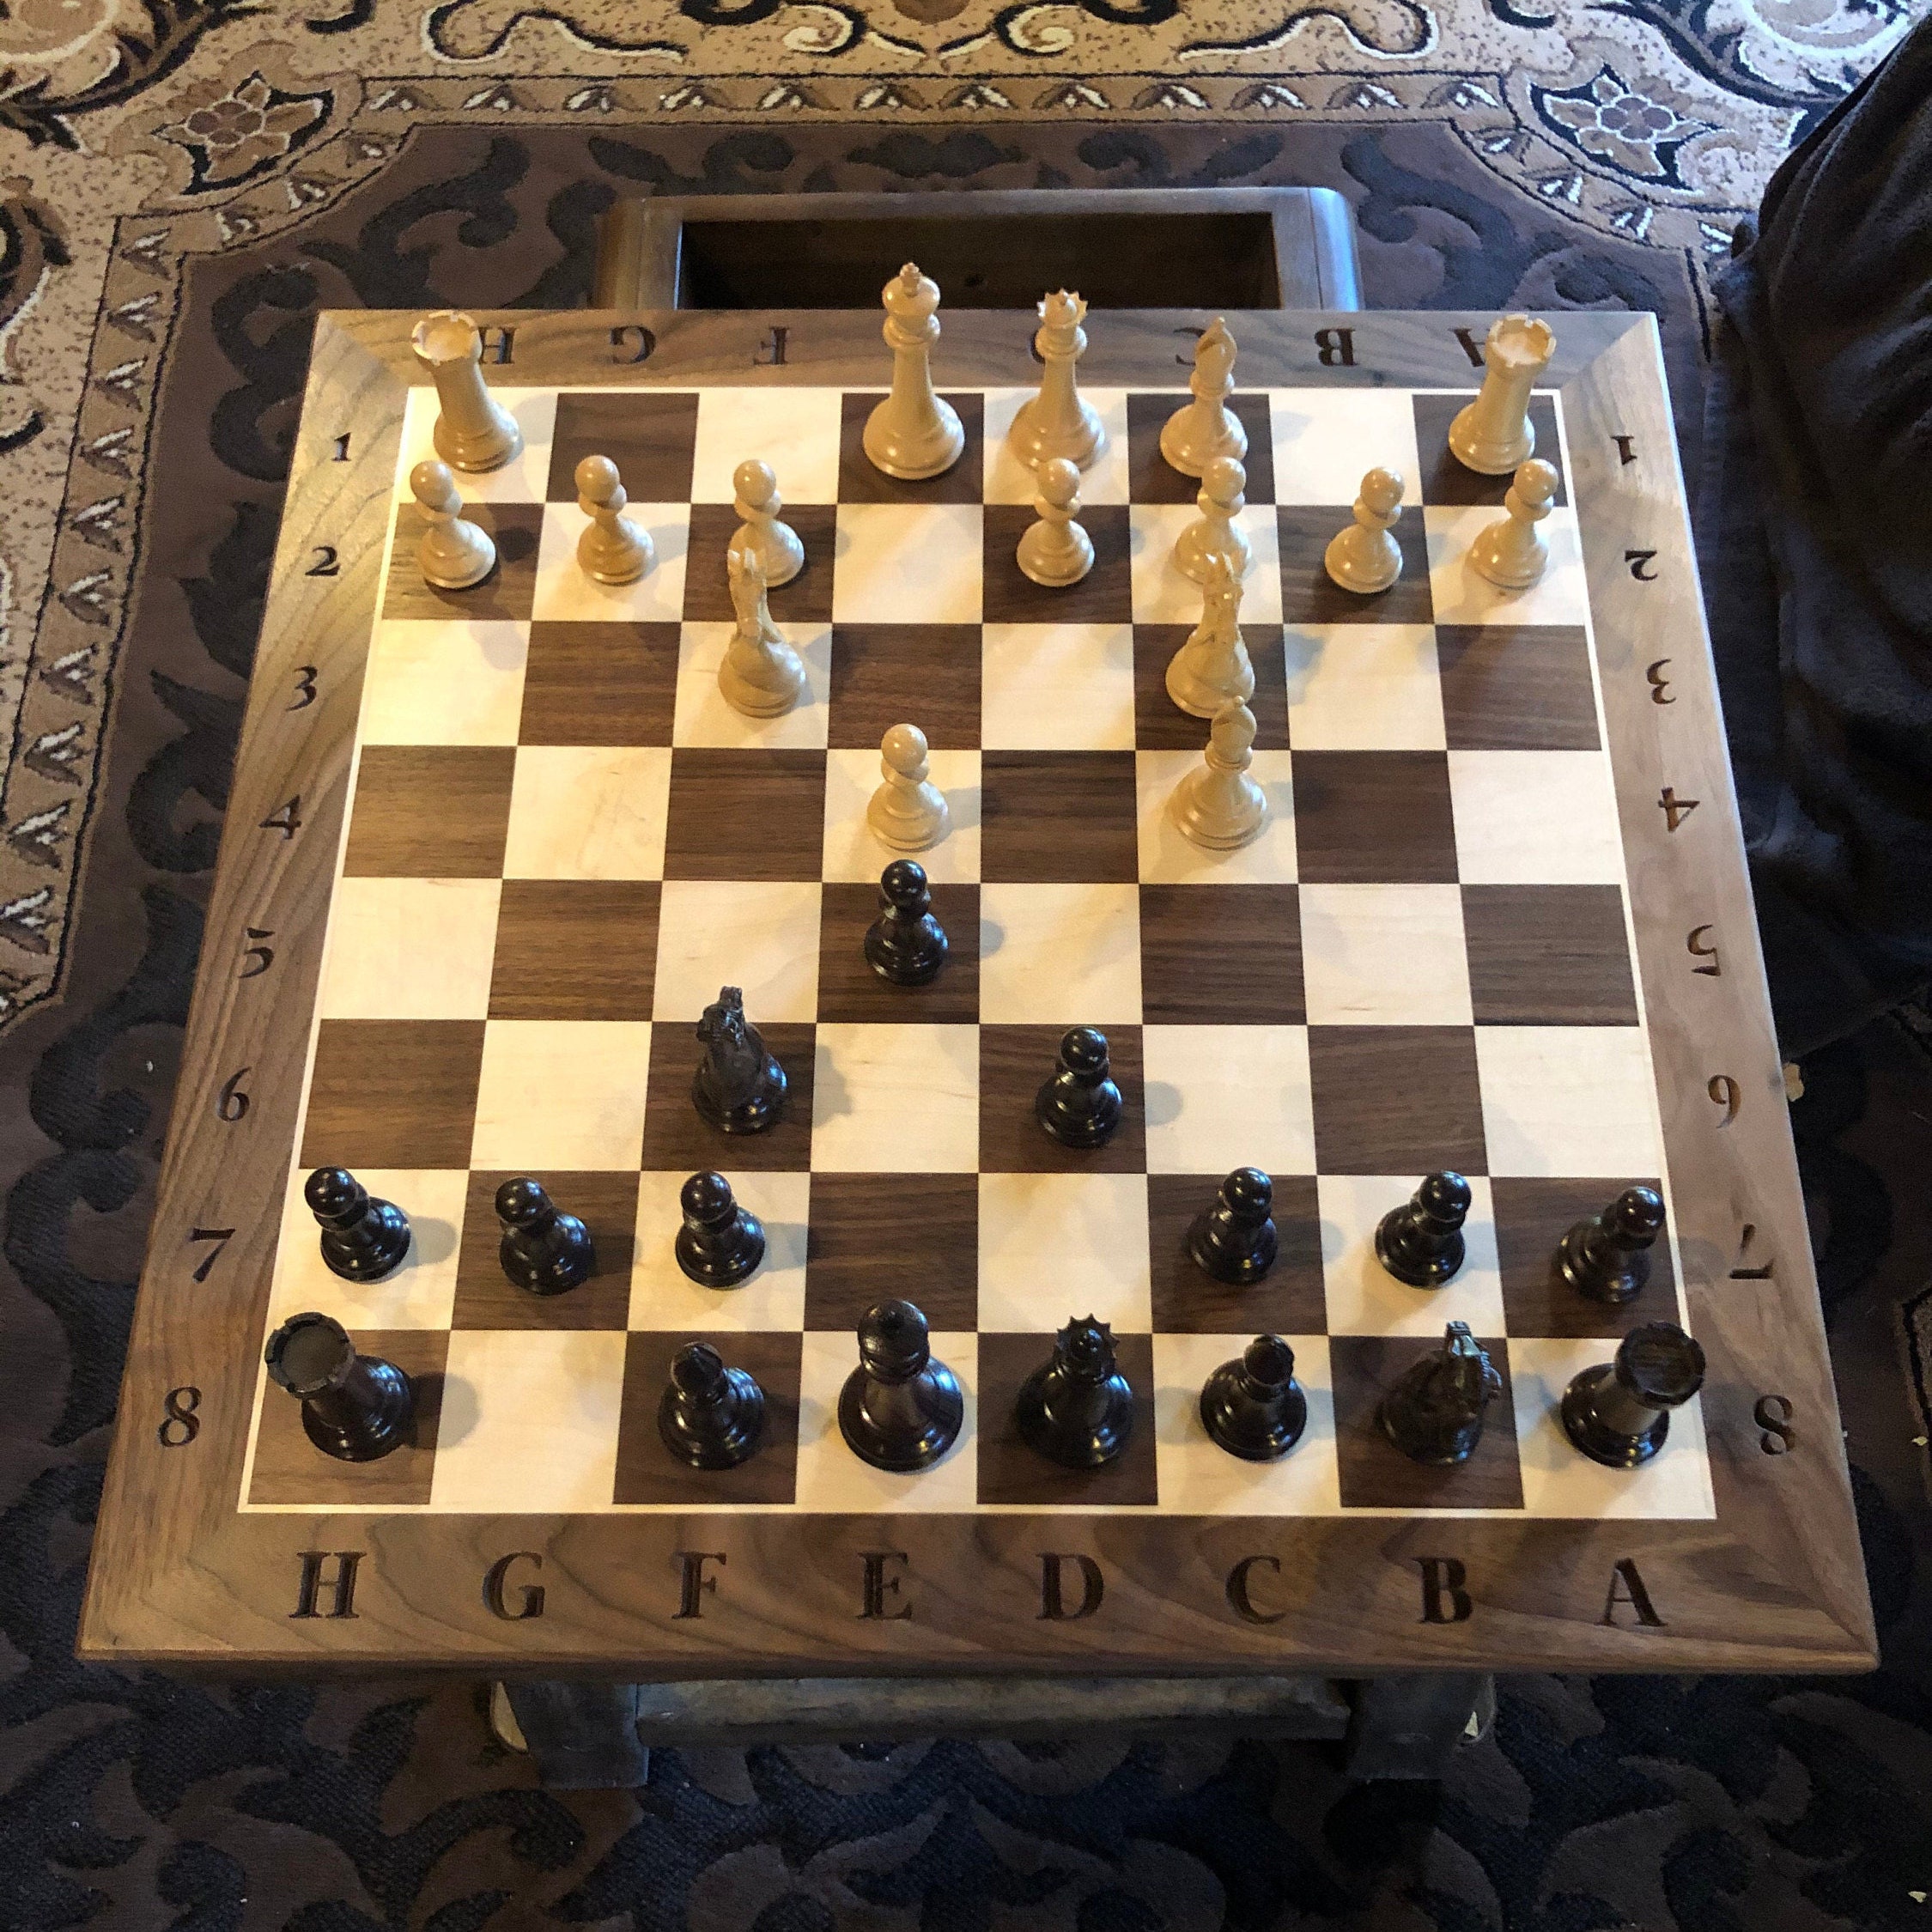 Realization about the state of chess : r/chess